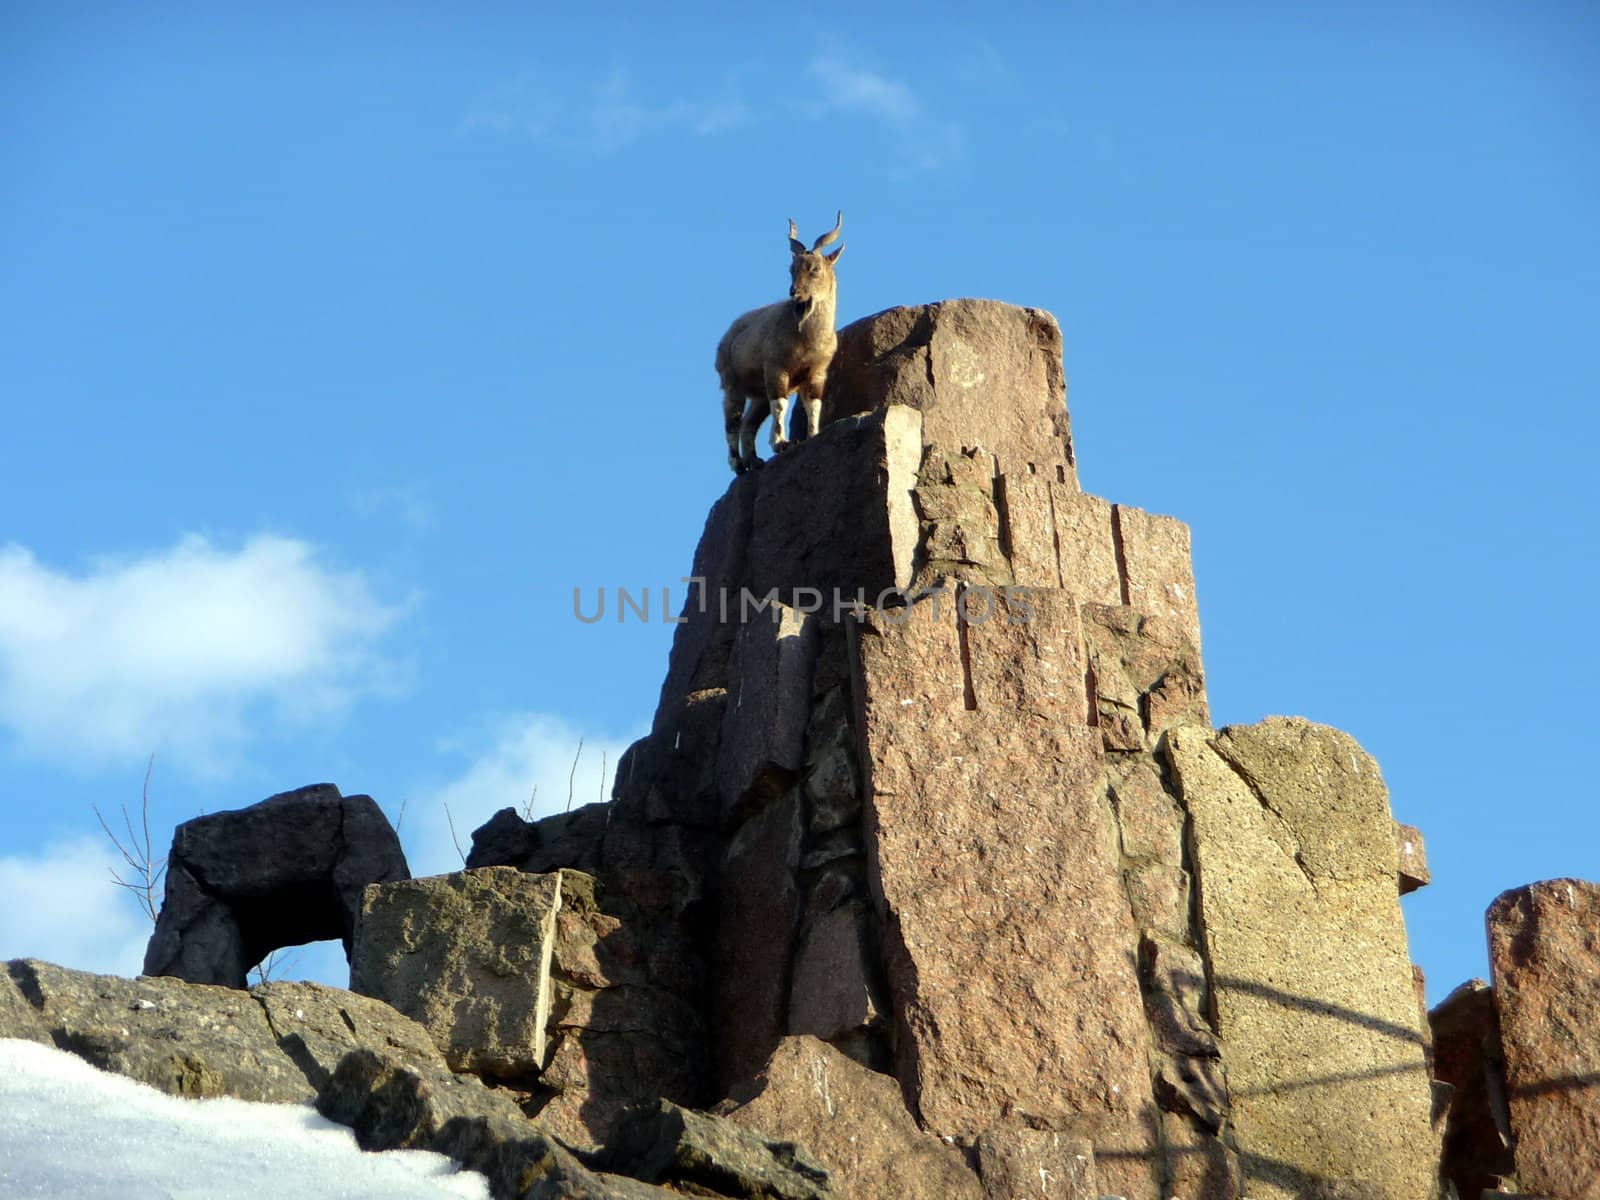 Goat on rock by tomatto